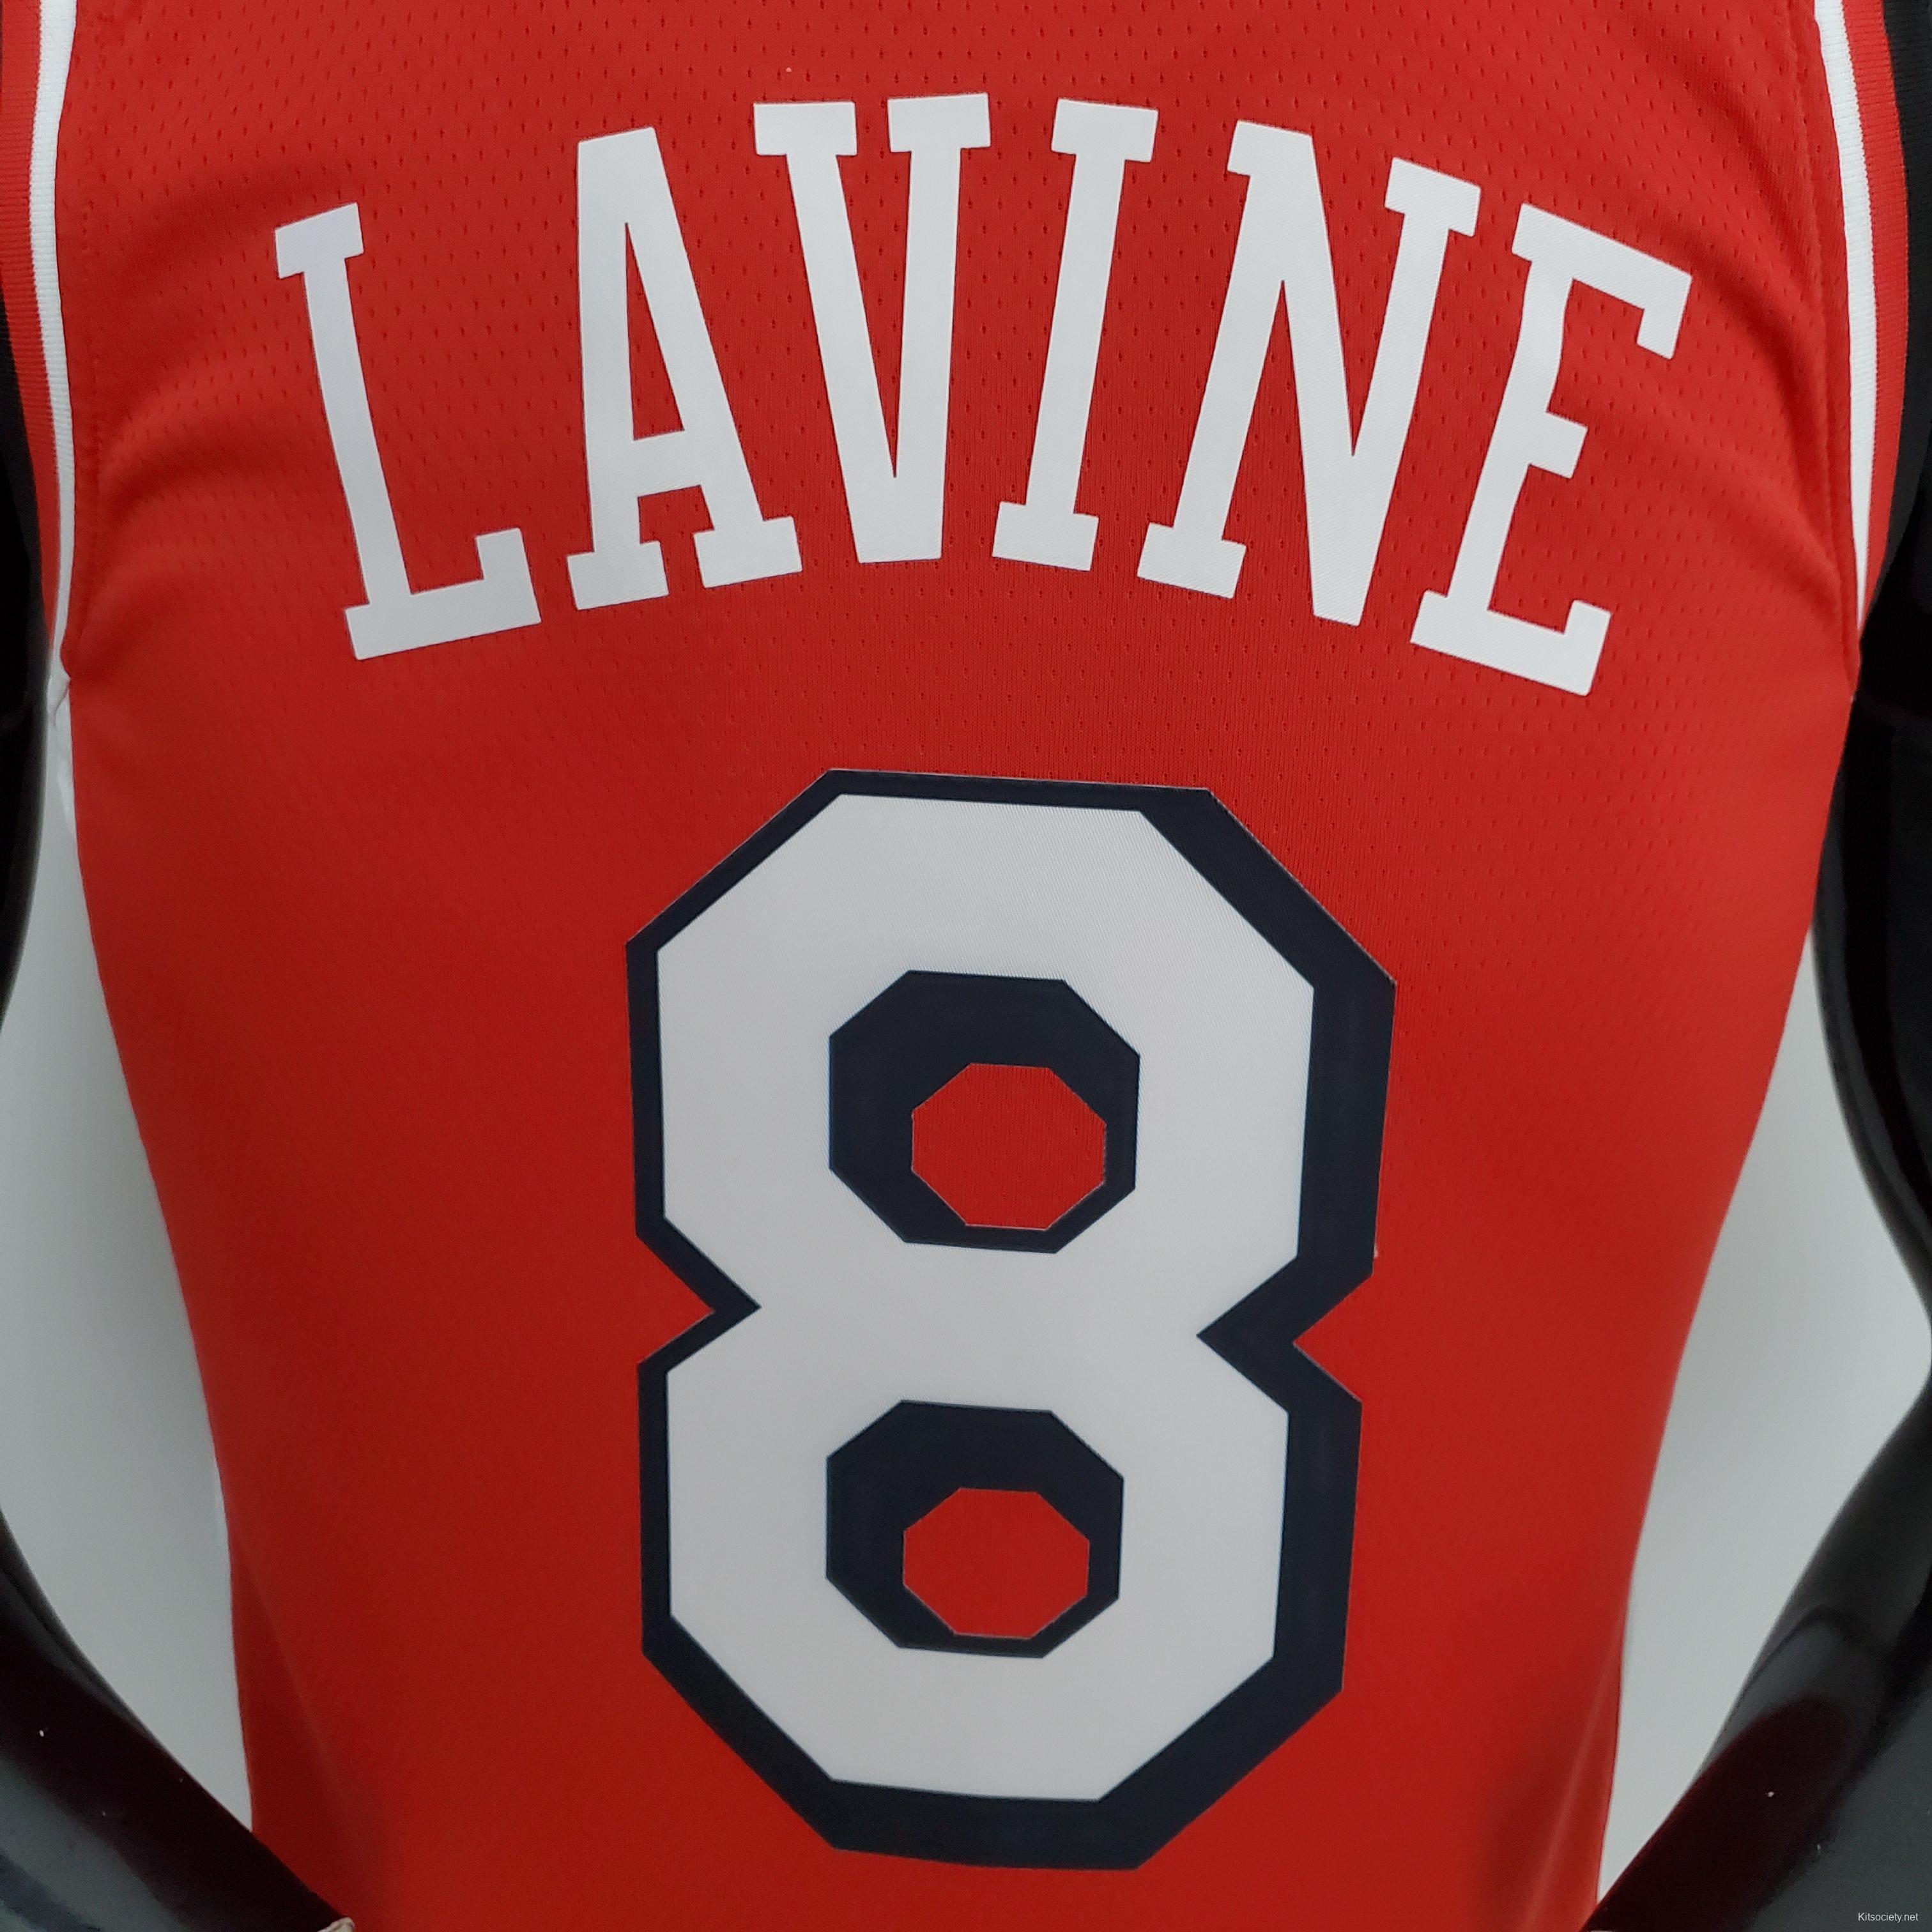 Best Selling Product] Chicago Bulls Zach Lavine 8 City Edition Blue Jersey  Combo Full Printing Hoodie Dress